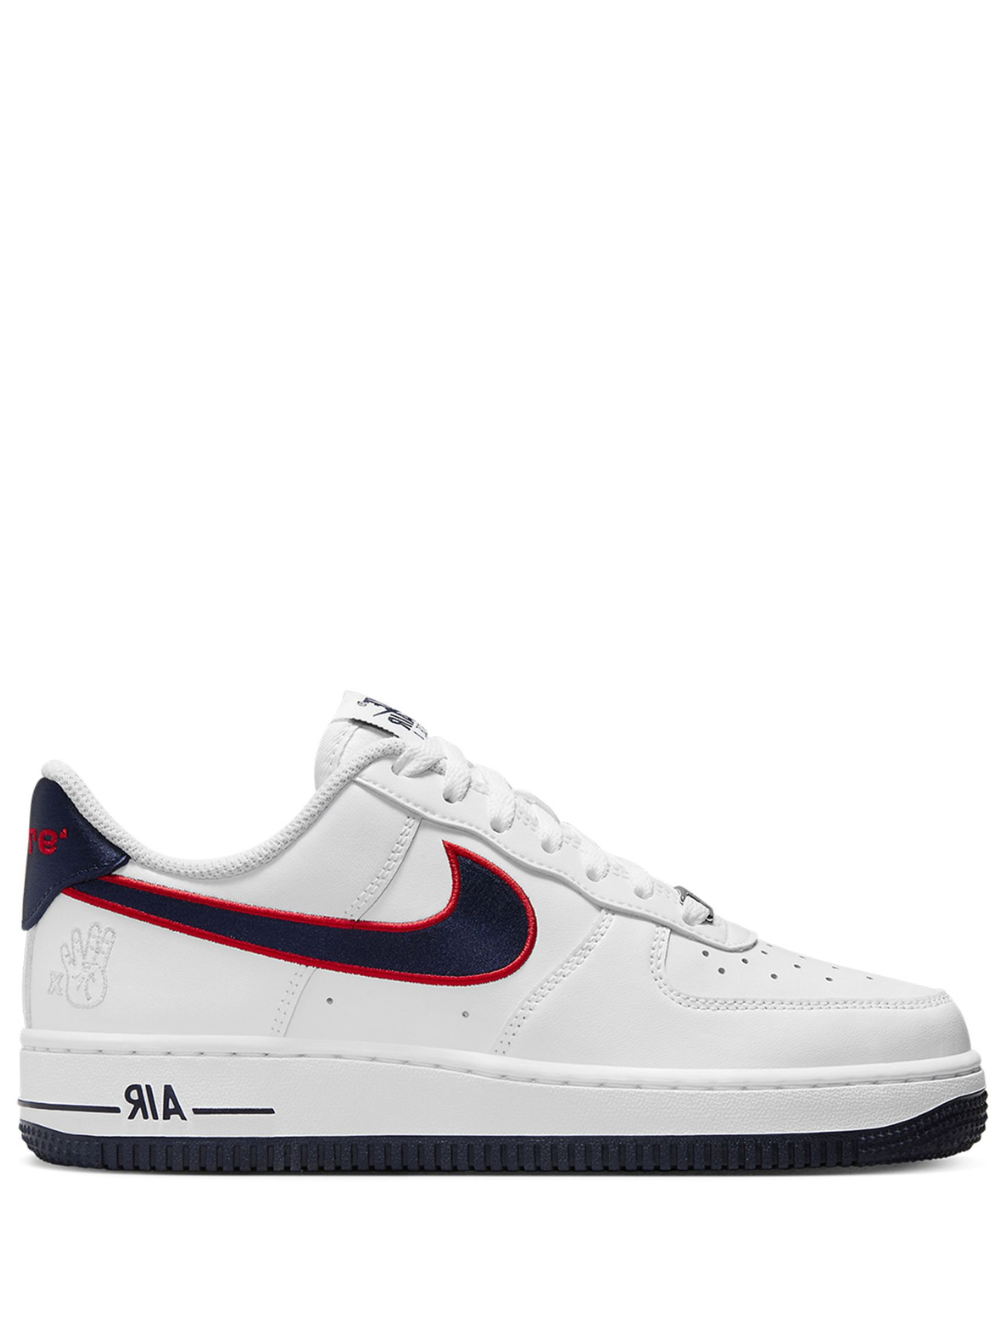 N372O AIR FORCE 1 LOW WMNS